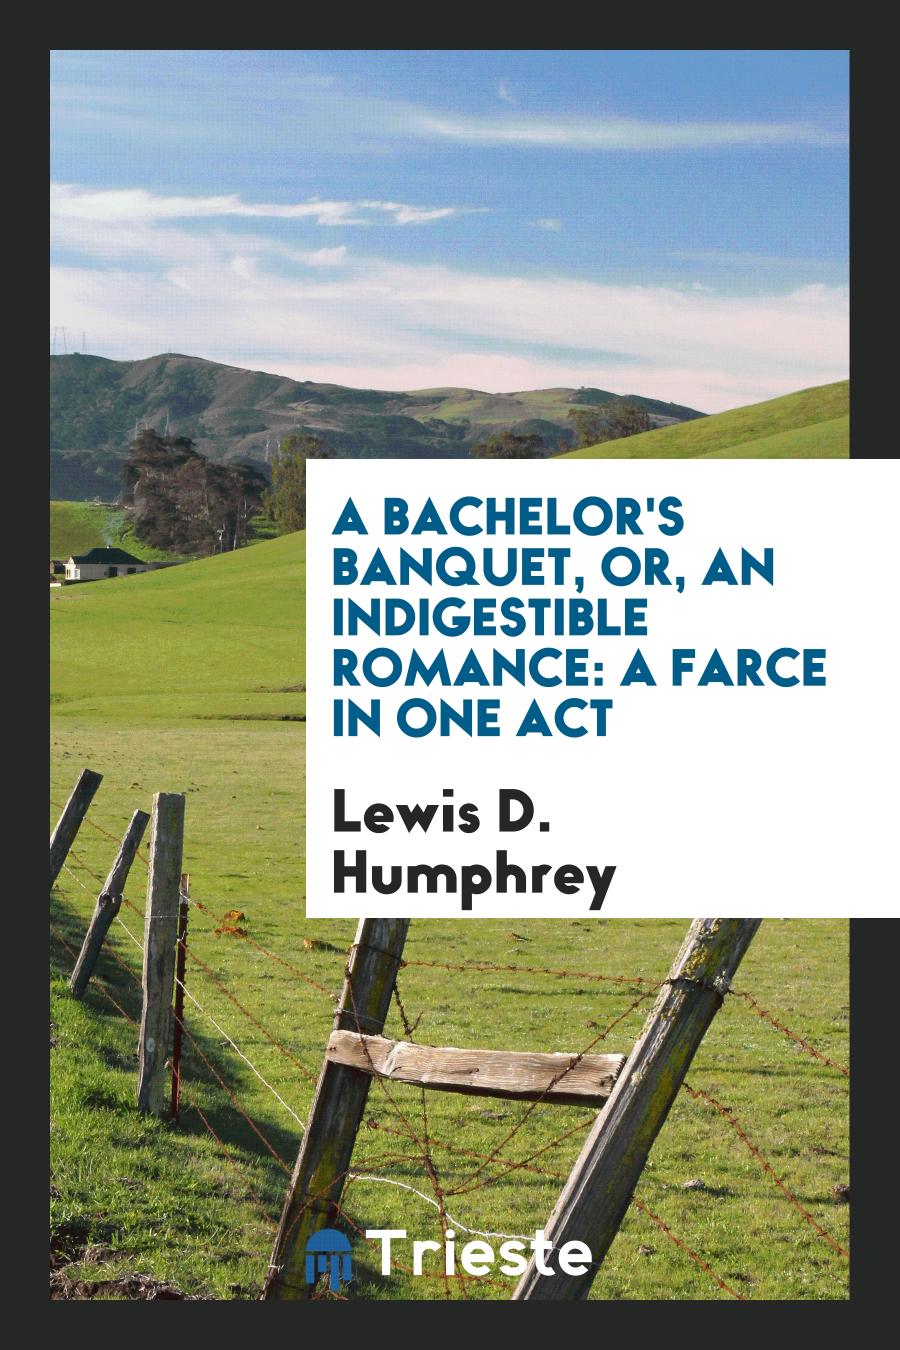 A Bachelor's Banquet, Or, An Indigestible Romance: A Farce in One Act